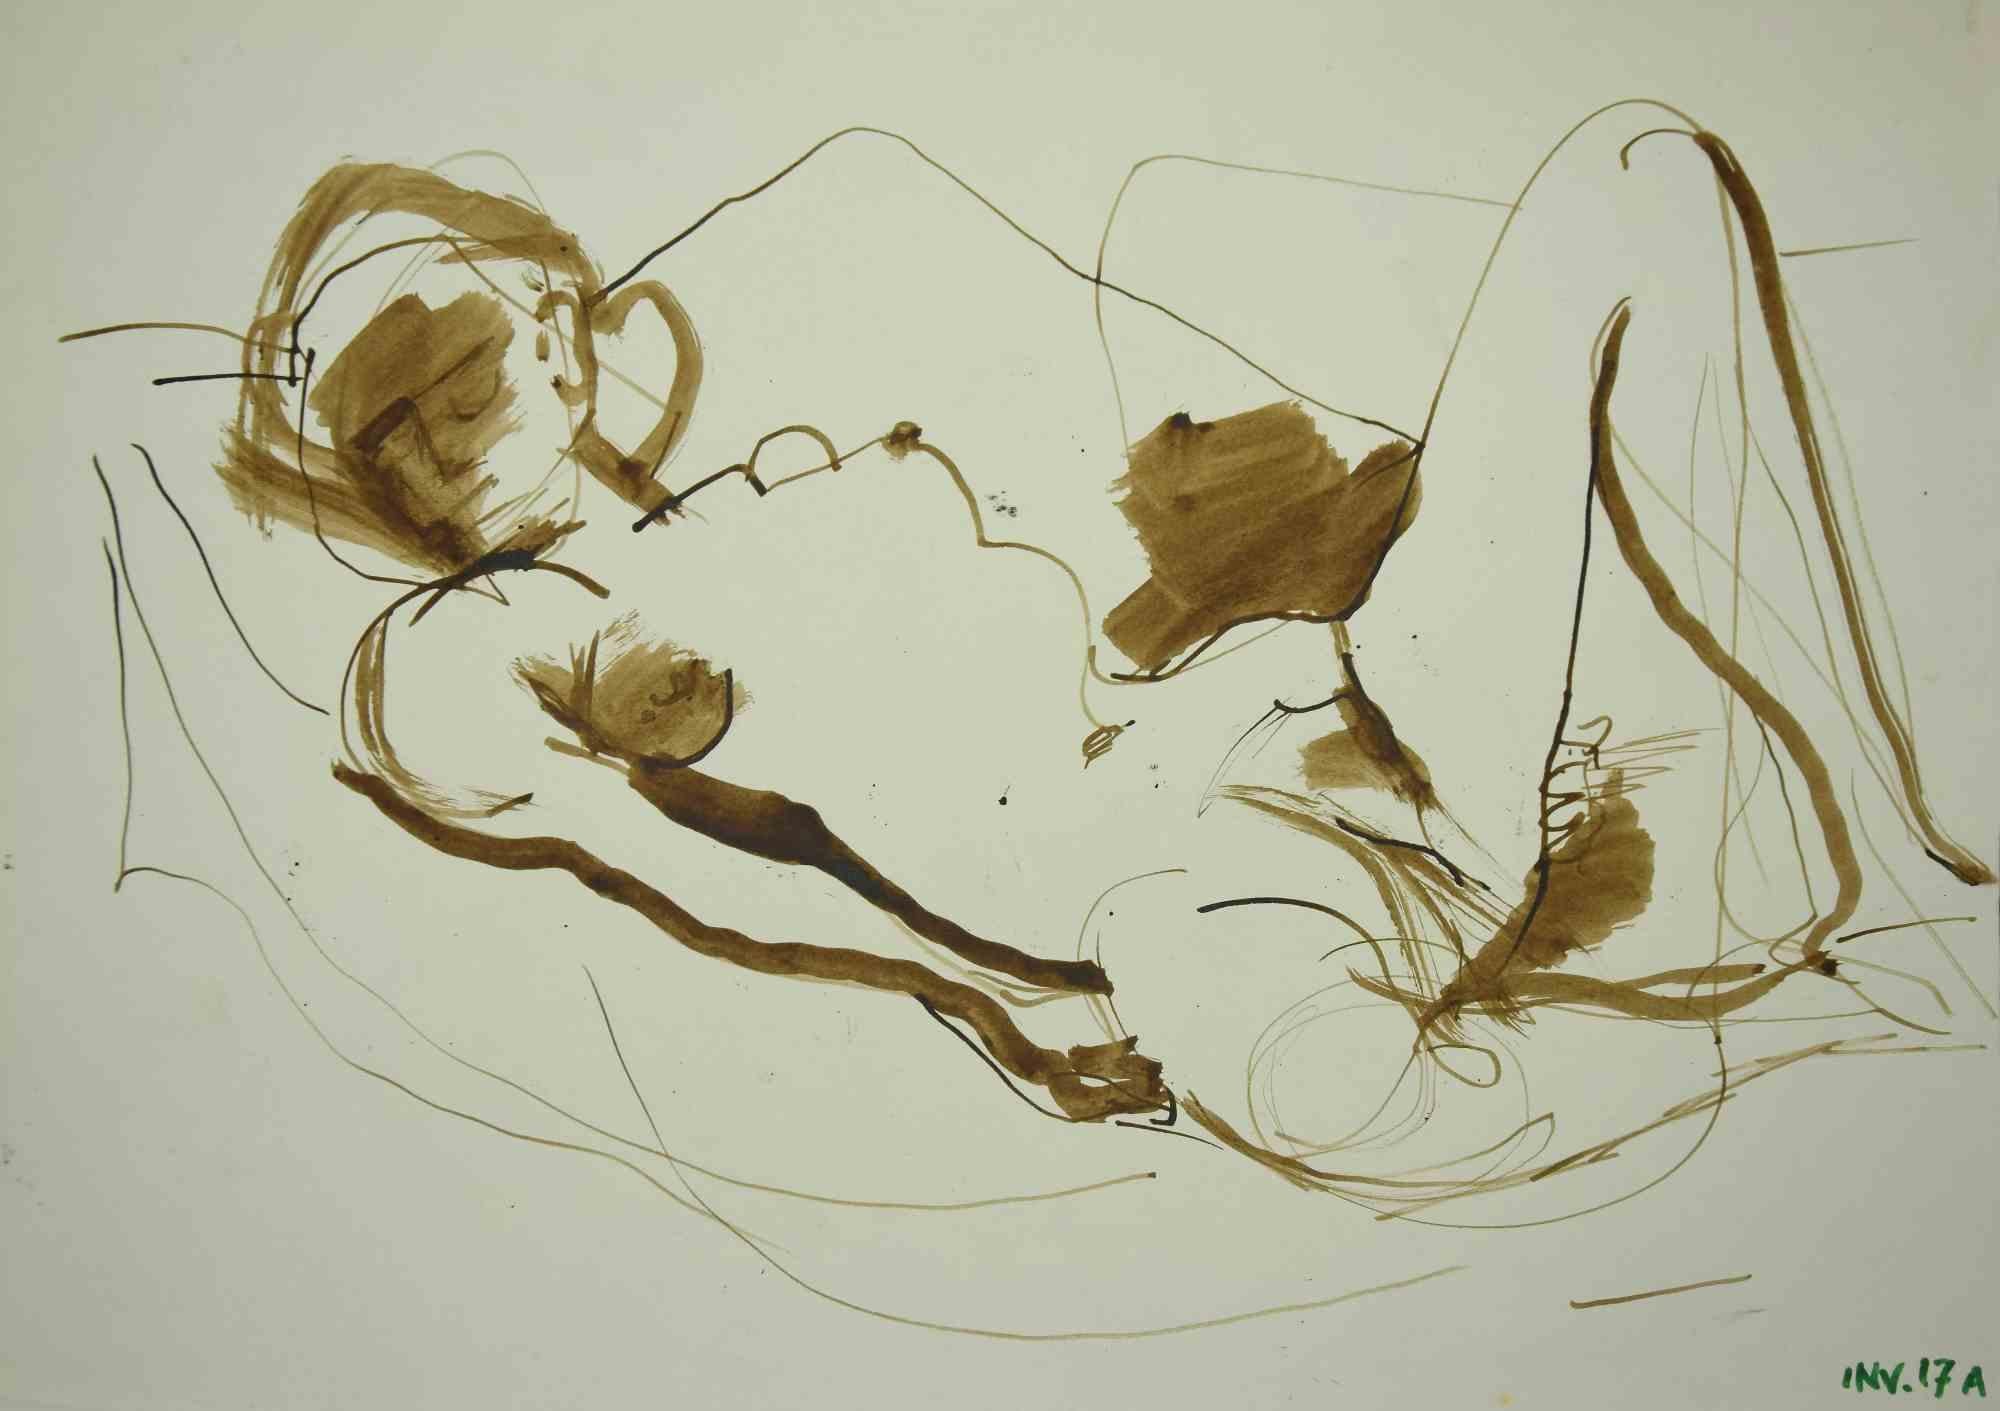 Reclined Nude is an original drawing in Ink and watercolor realized by Leo Guida in the 1970s.

Good condition.

Leo Guida  (1992 - 2017). Sensitive to current issues, artistic movements and historical techniques, Leo Guida has been able to weave